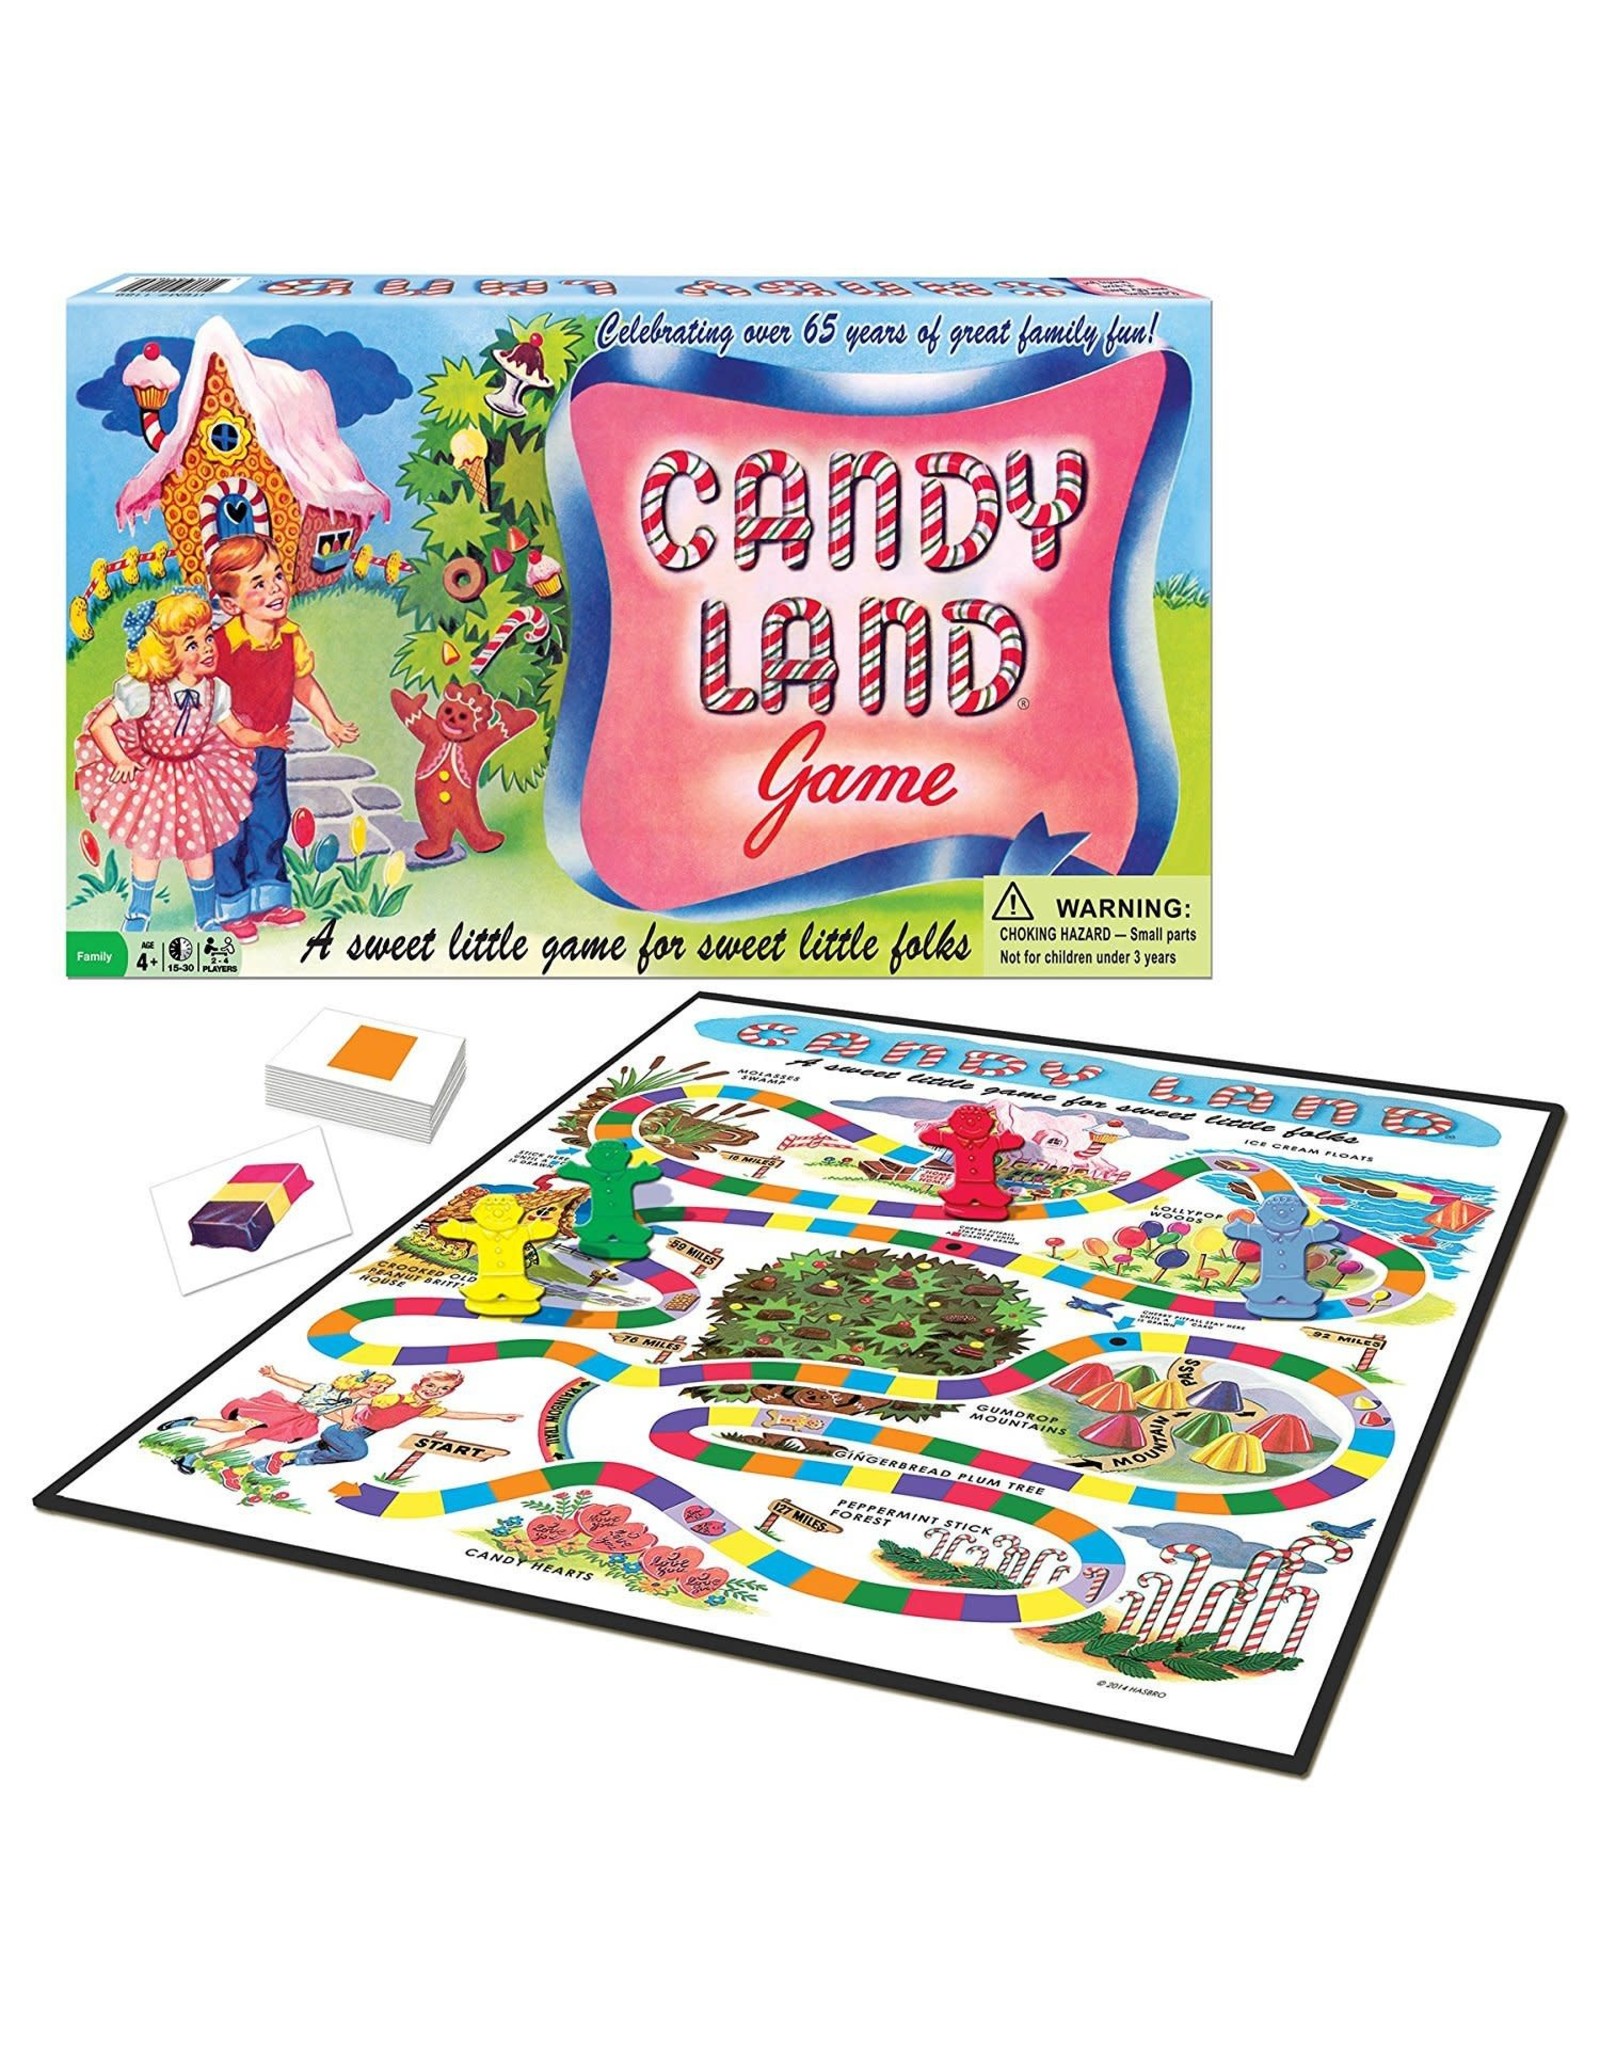 Candy Land Classic Edition